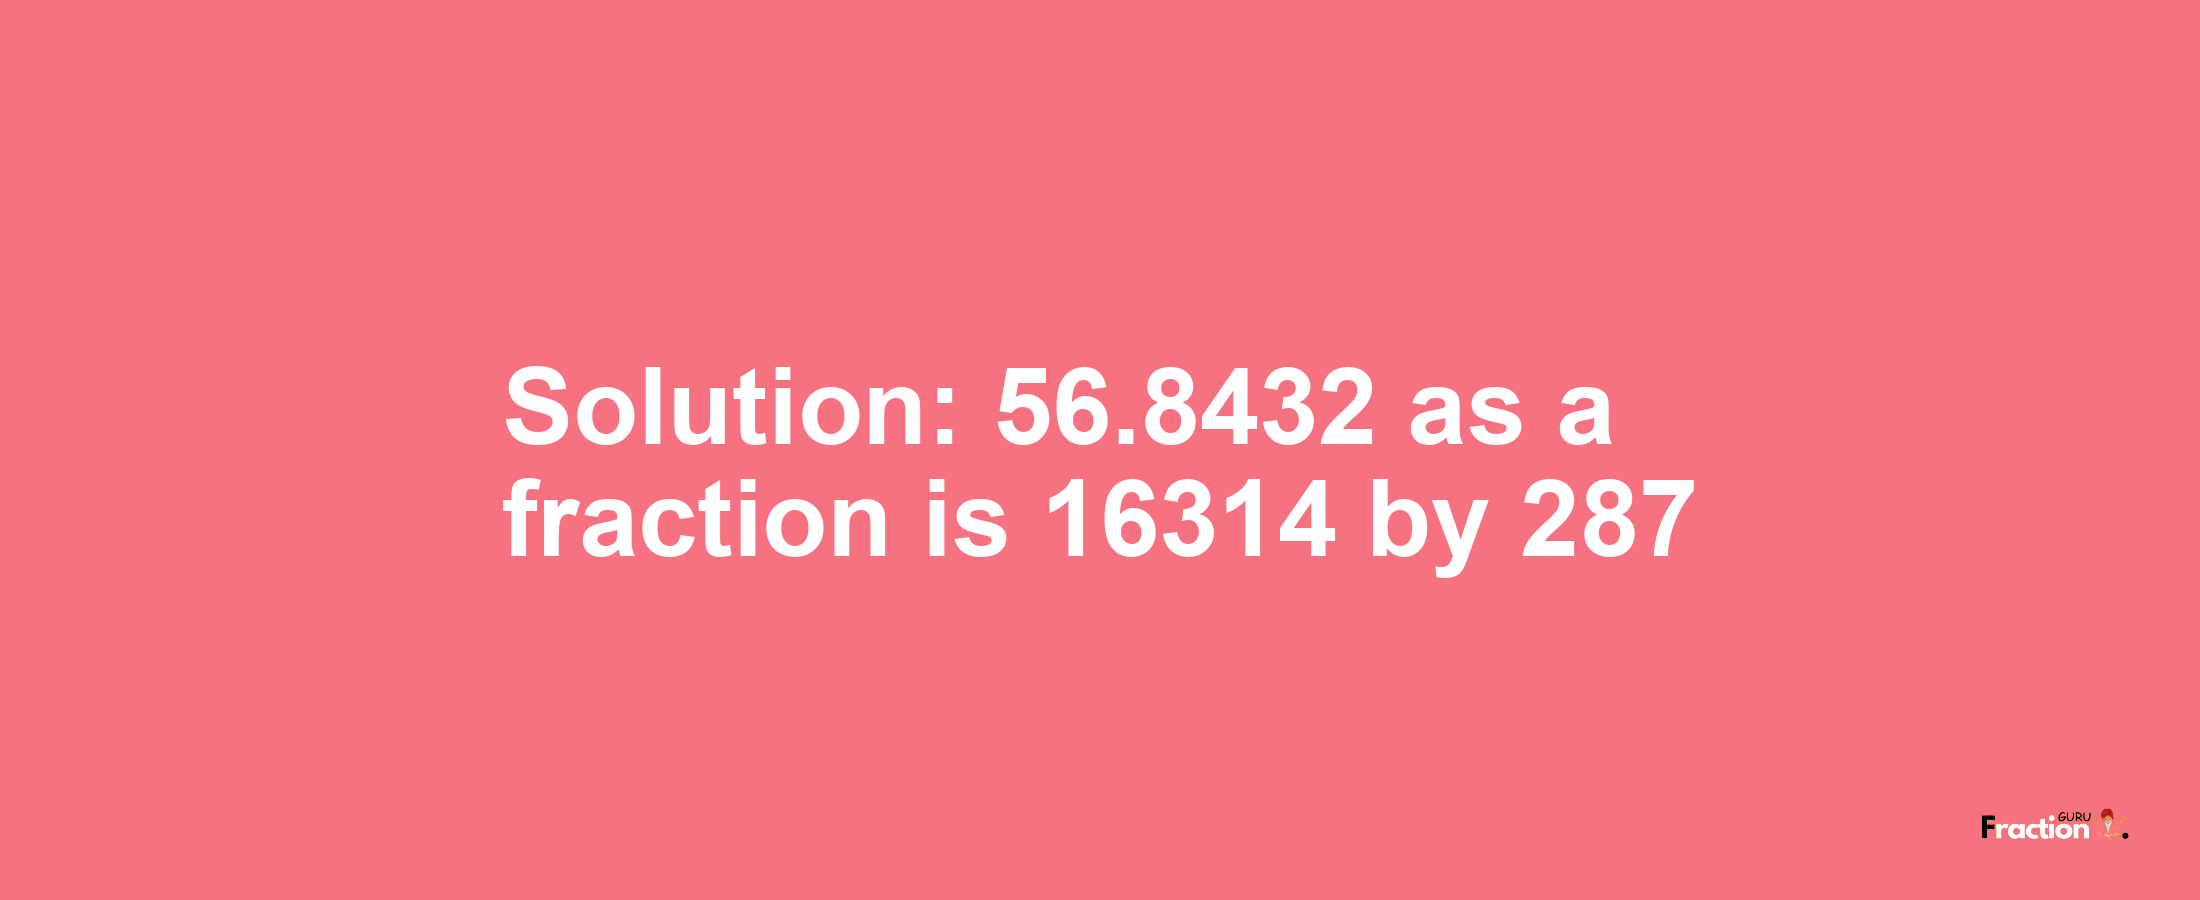 Solution:56.8432 as a fraction is 16314/287